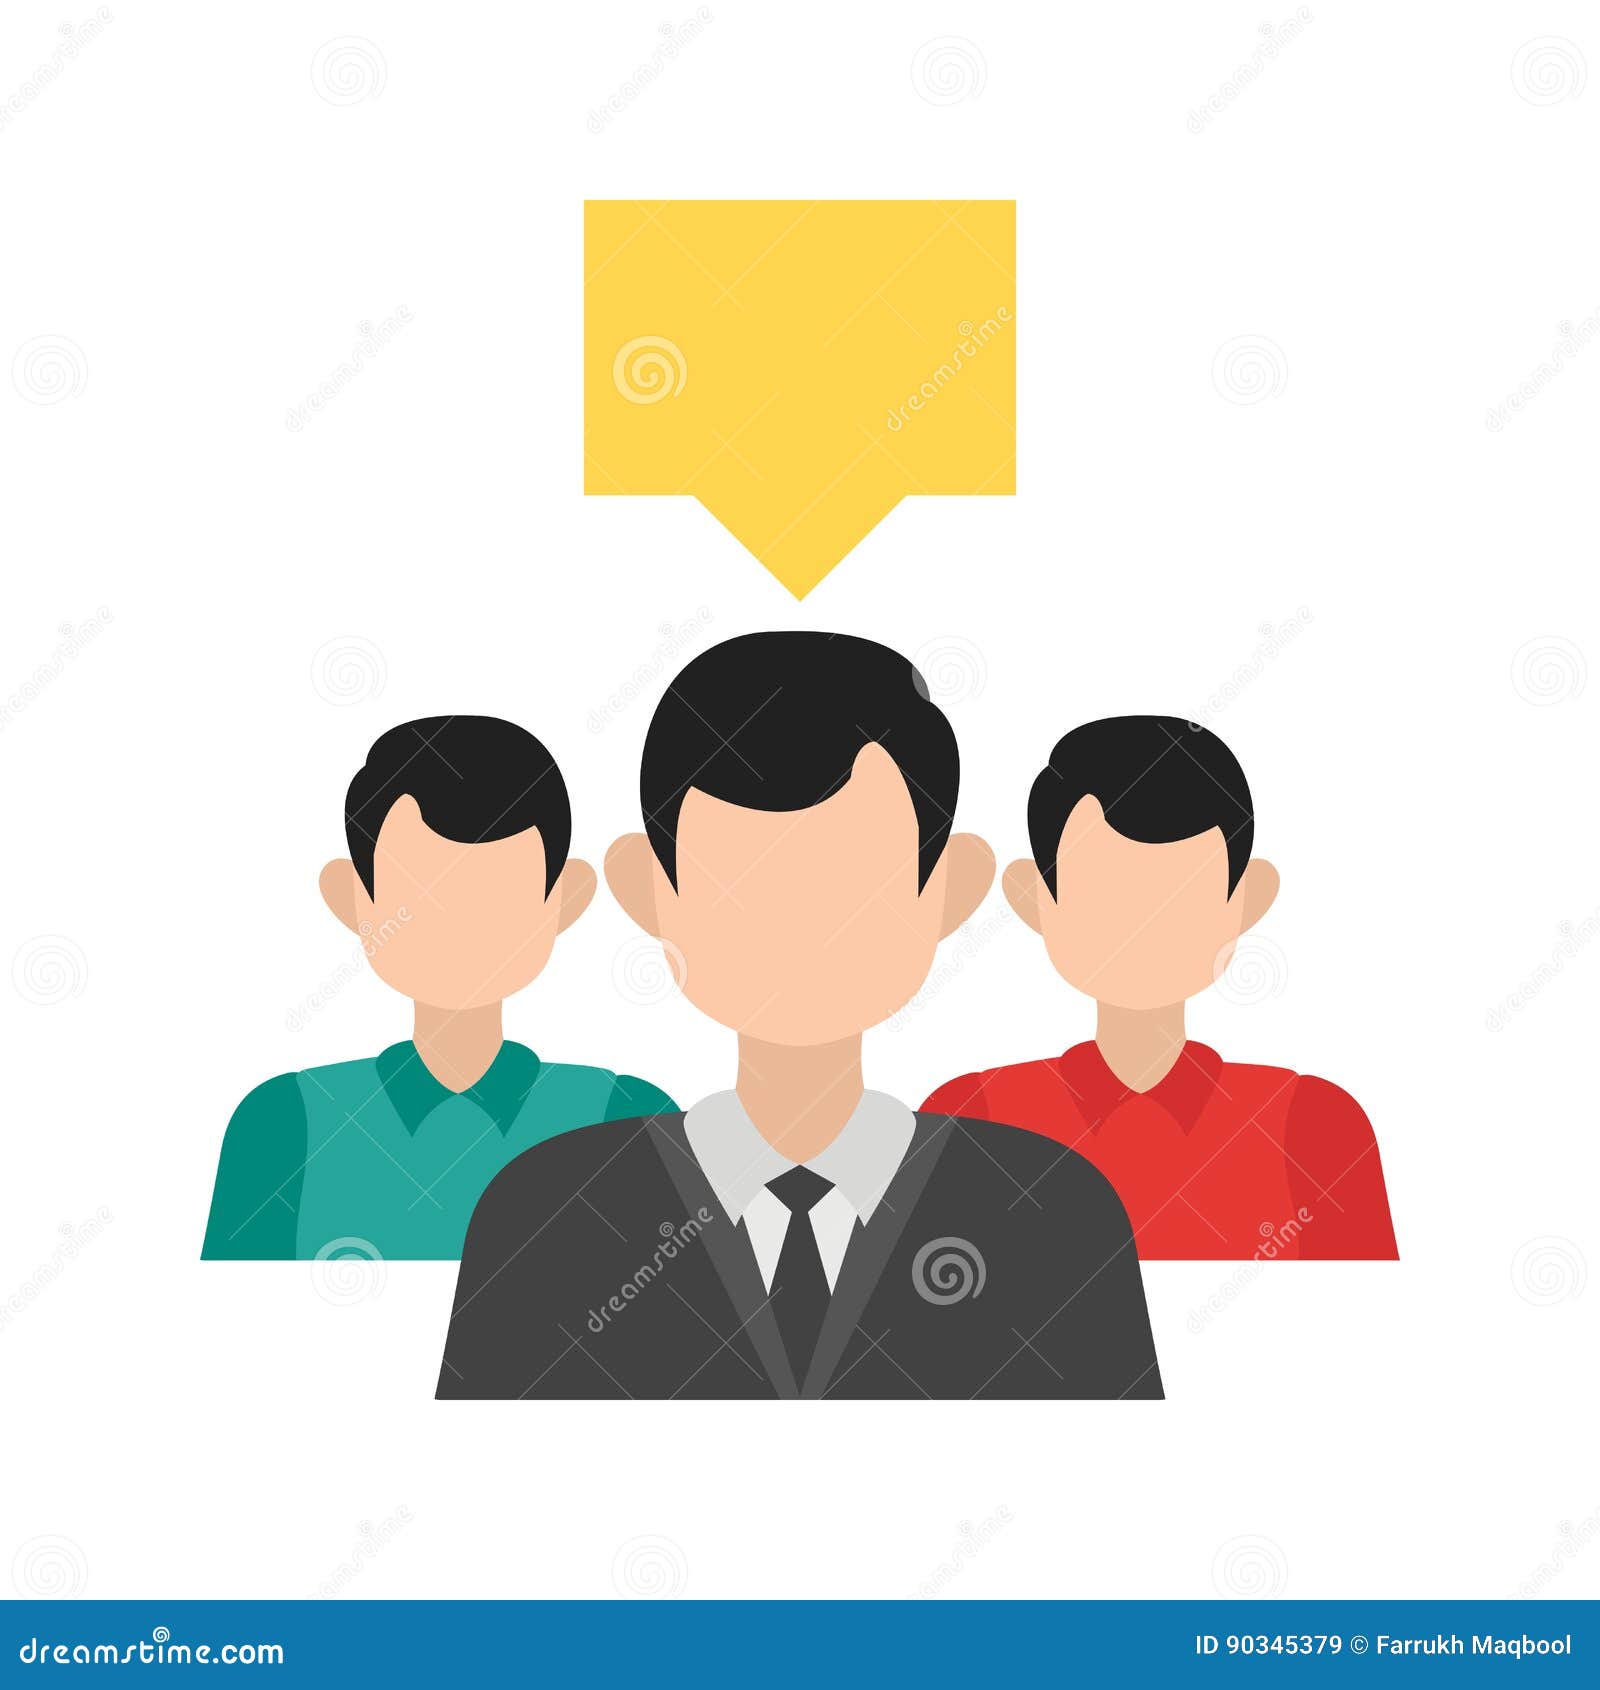 Advocacy stock vector. Illustration of concept, support - 90345379